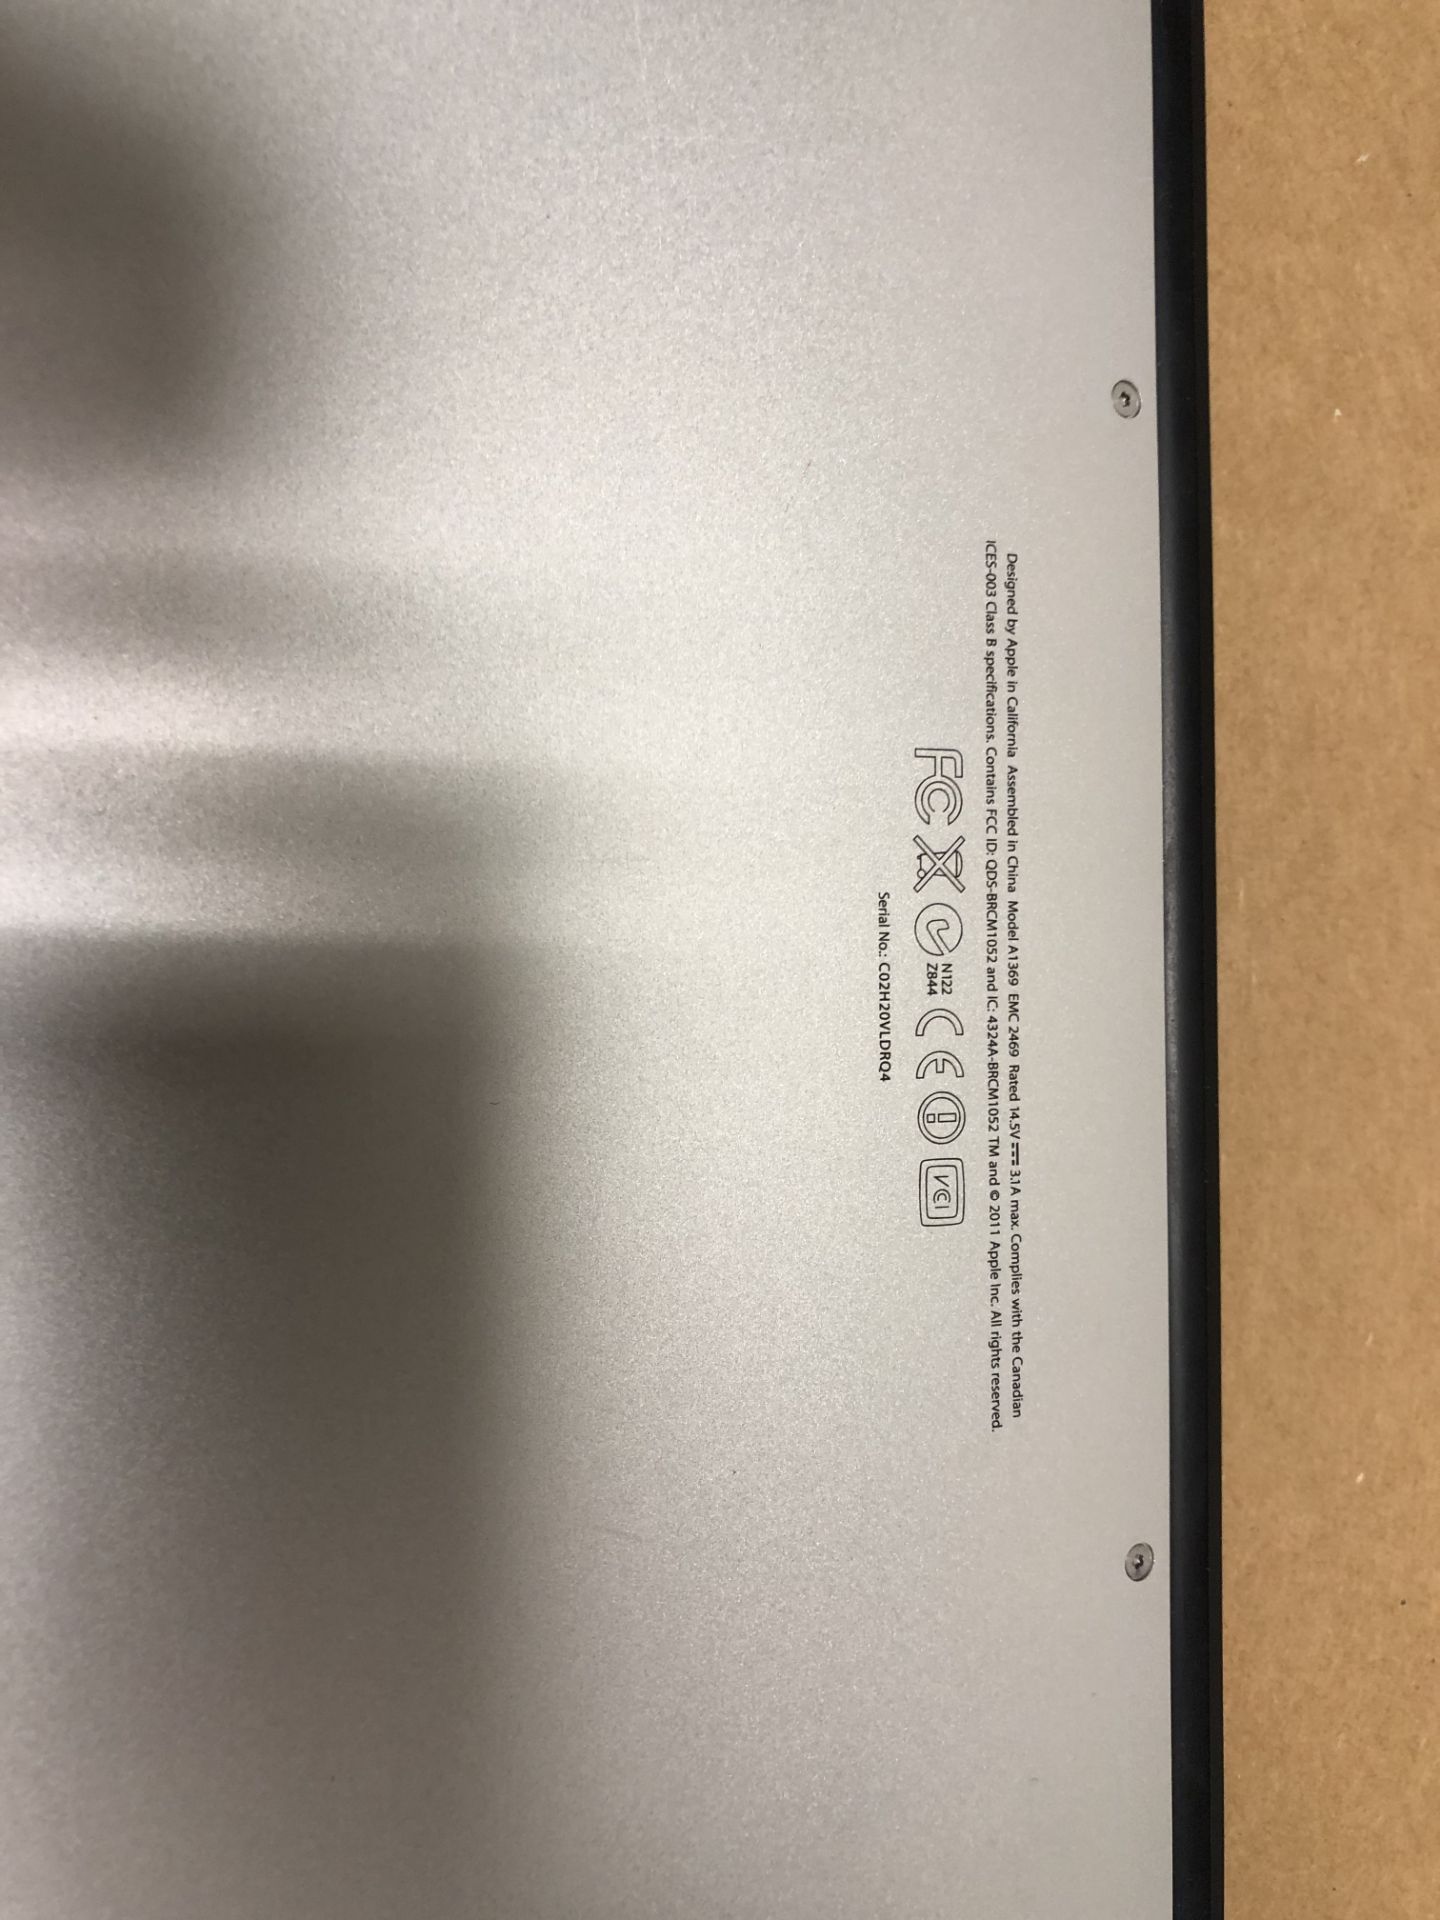 Mac Book Air #A1369 Laptop (Hard Drive Wiped) - Image 3 of 3